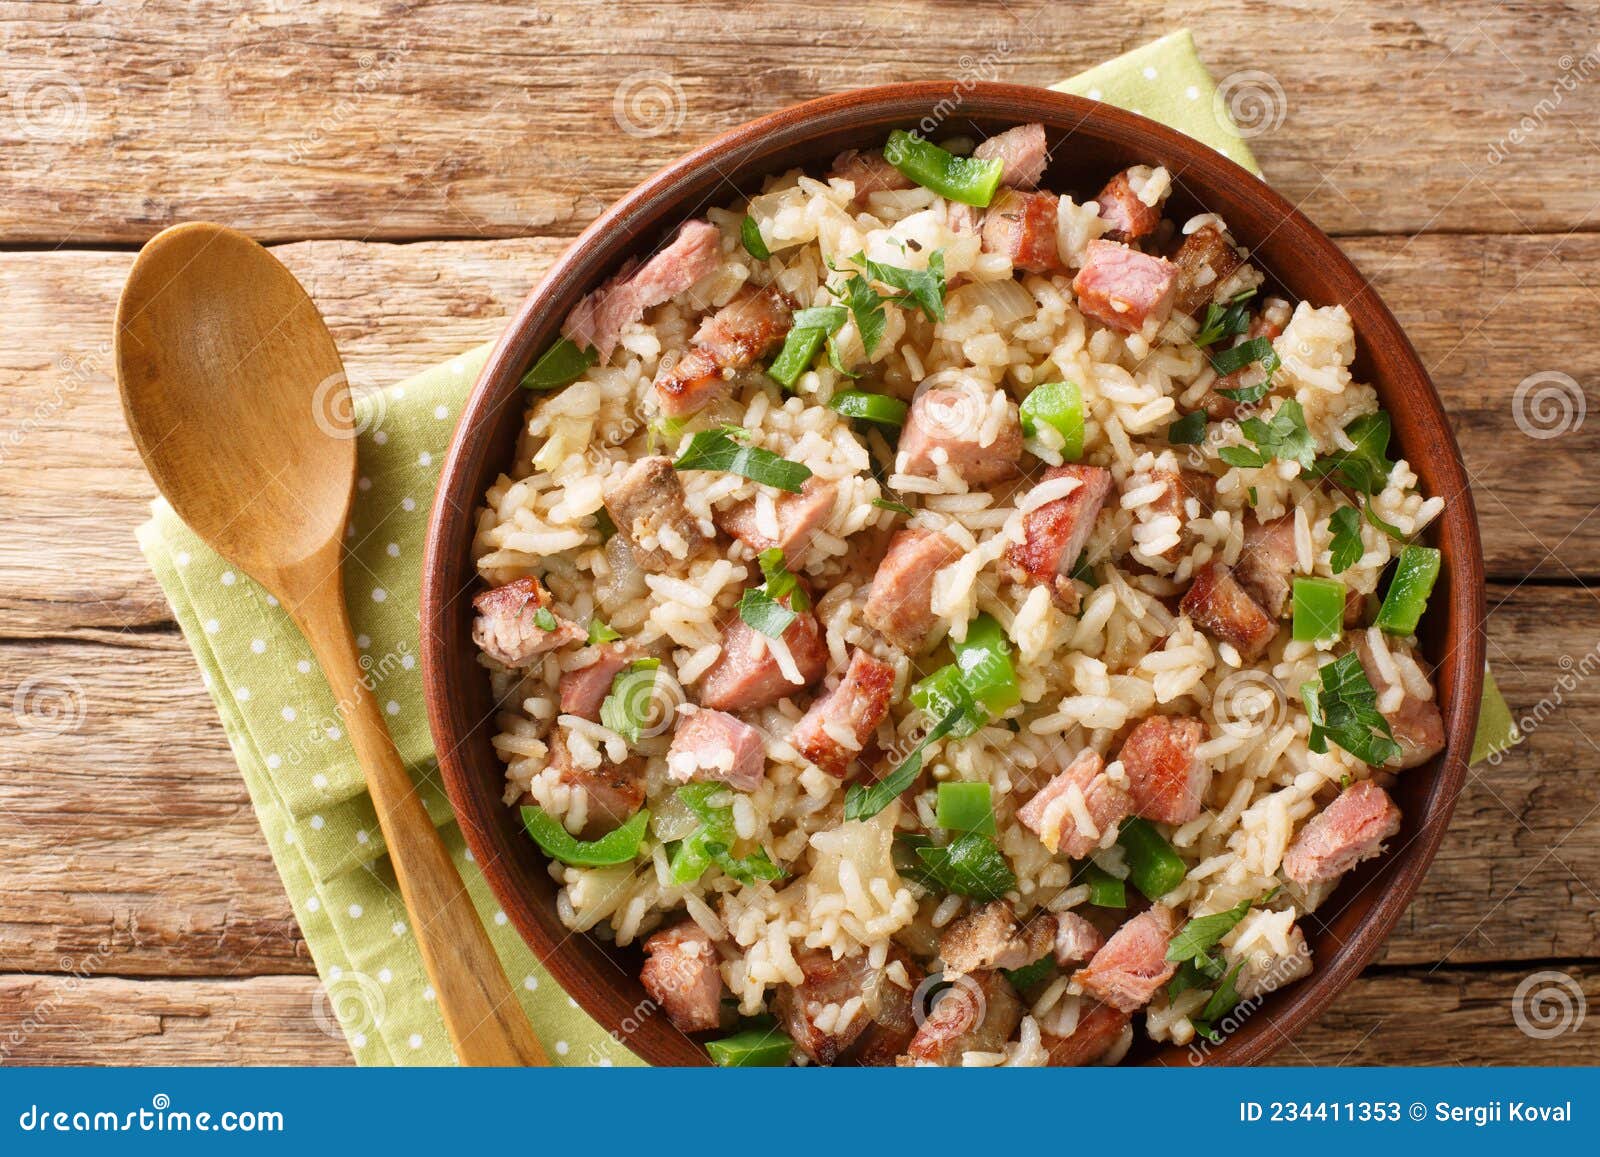 arroz carreteiro is a hearty rice and meat dish close up in the bowl. horizontal top view